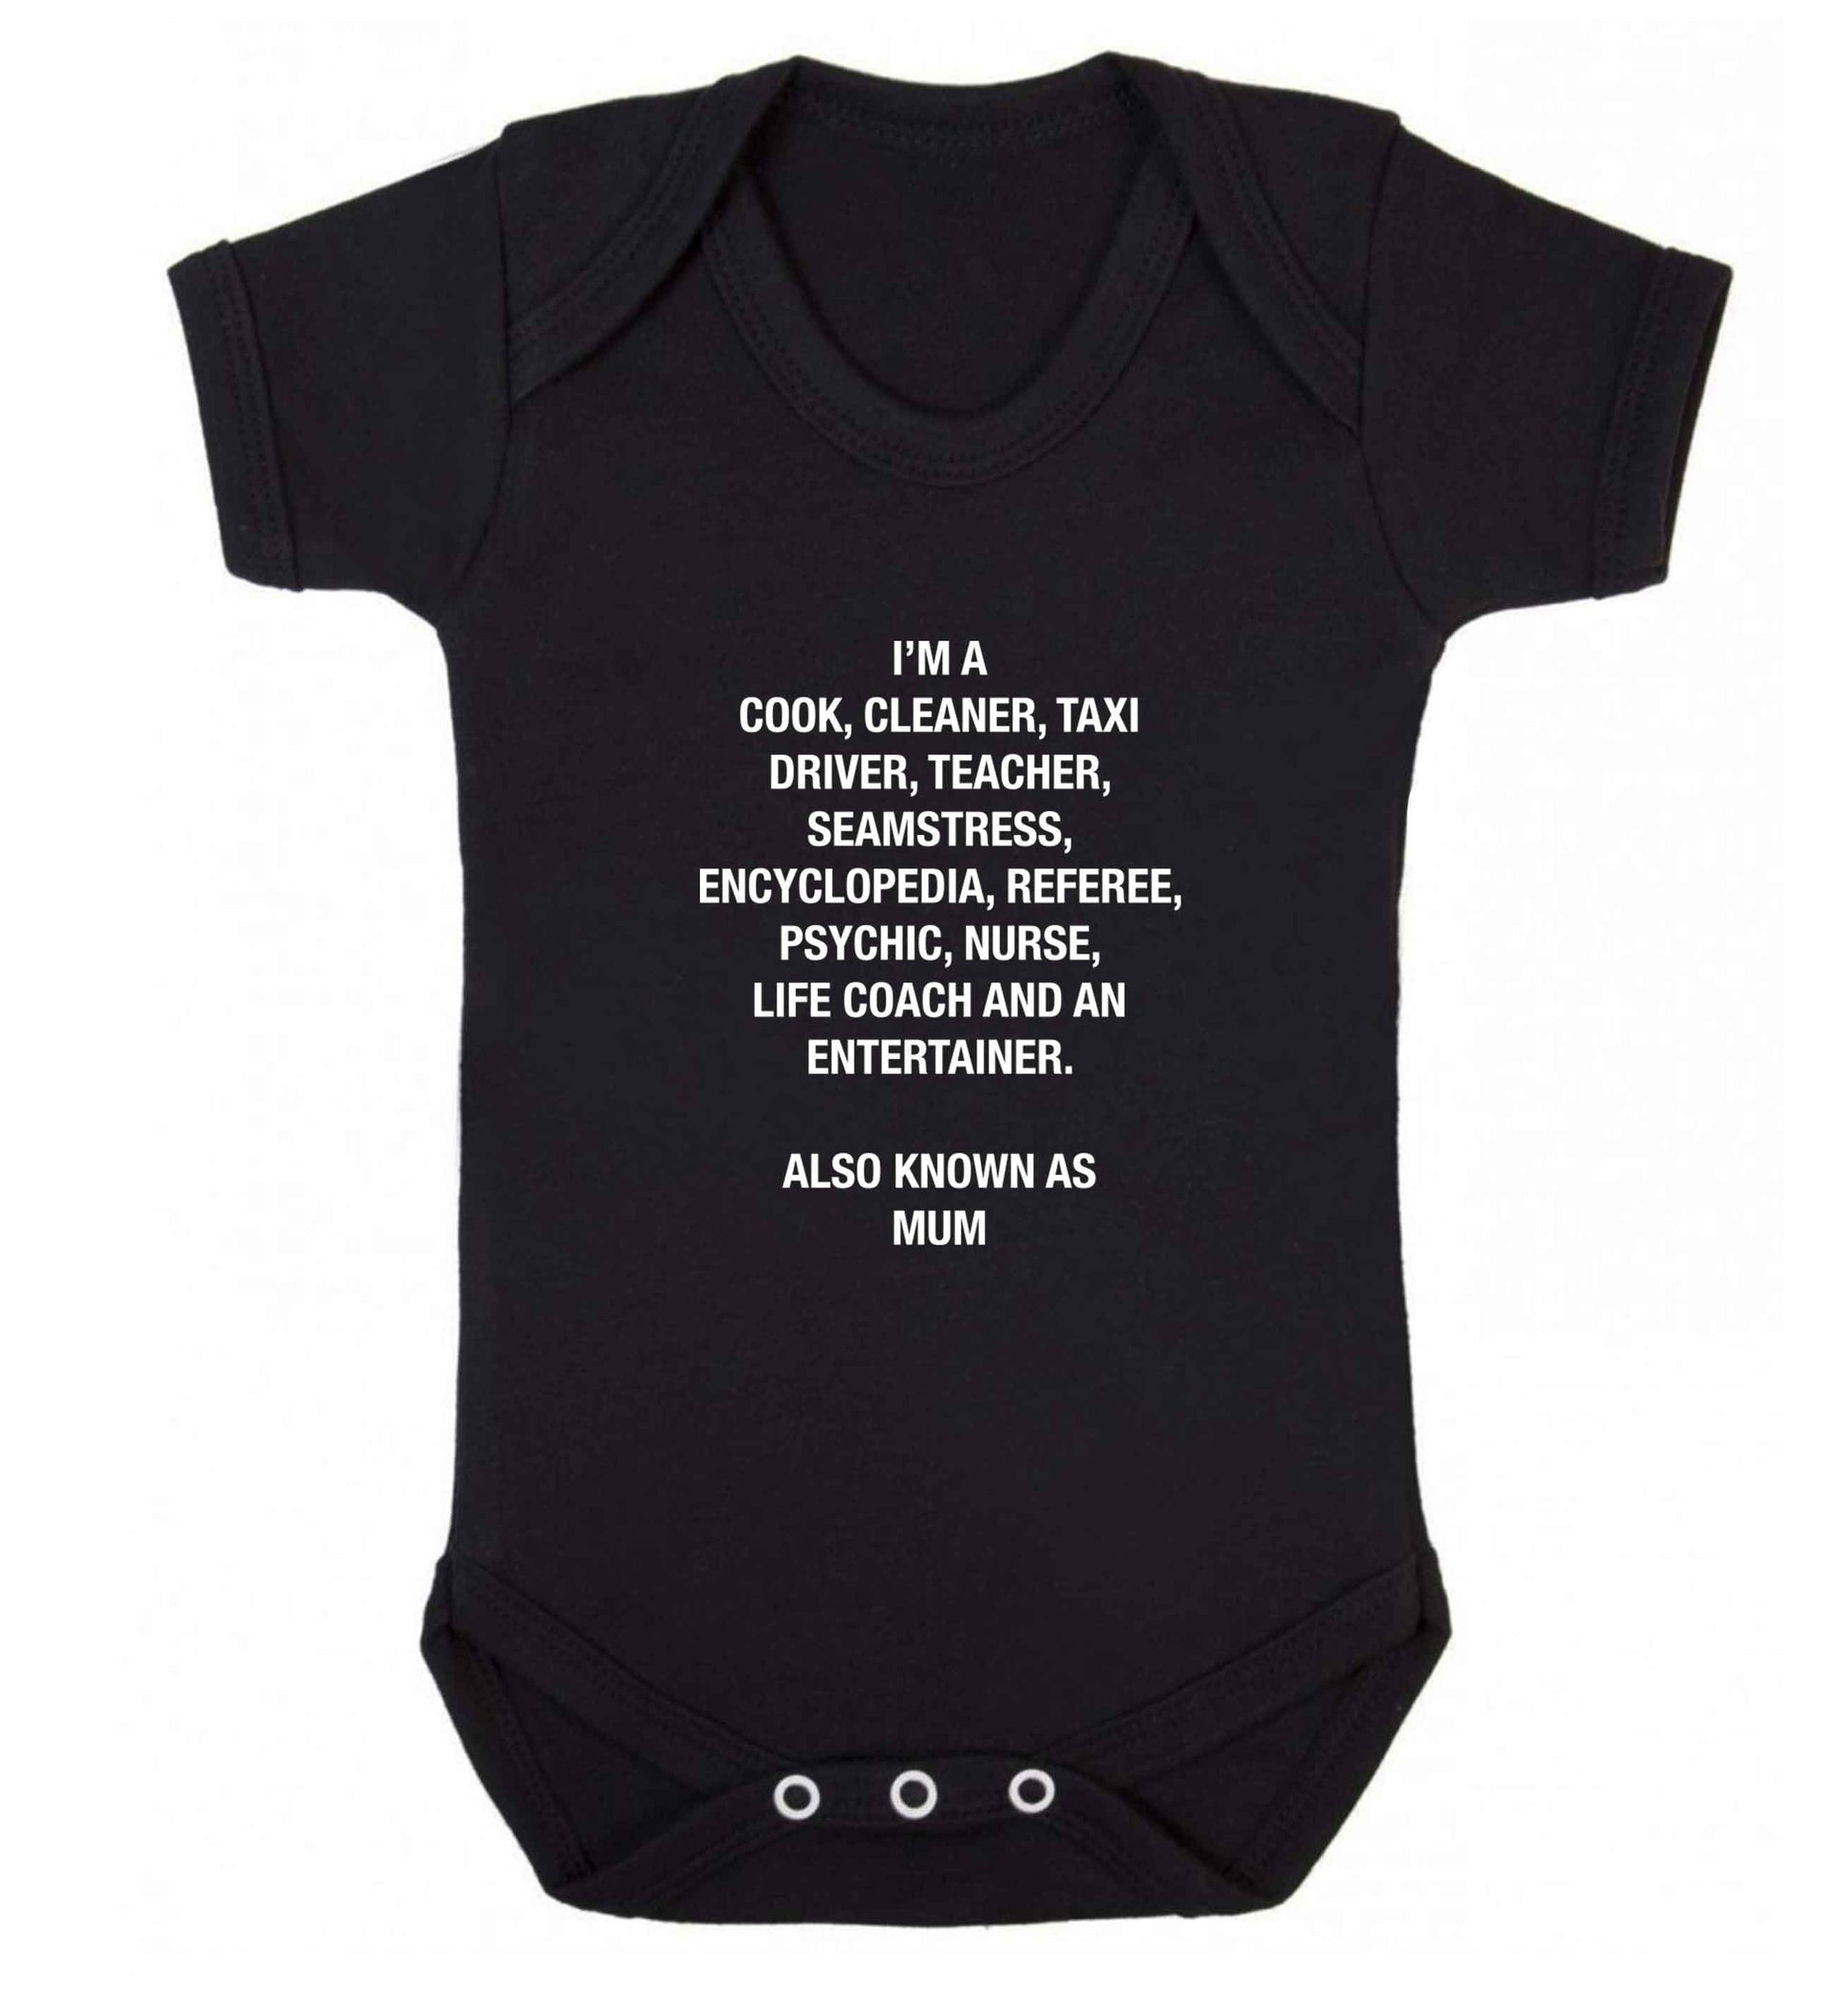 Funny gifts for your mum on mother's dayor her birthday! Mum, cook, cleaner, taxi driver, teacher, seamstress, encyclopedia, referee, psychic, nurse, life coach and entertainer baby vest black 18-24 months